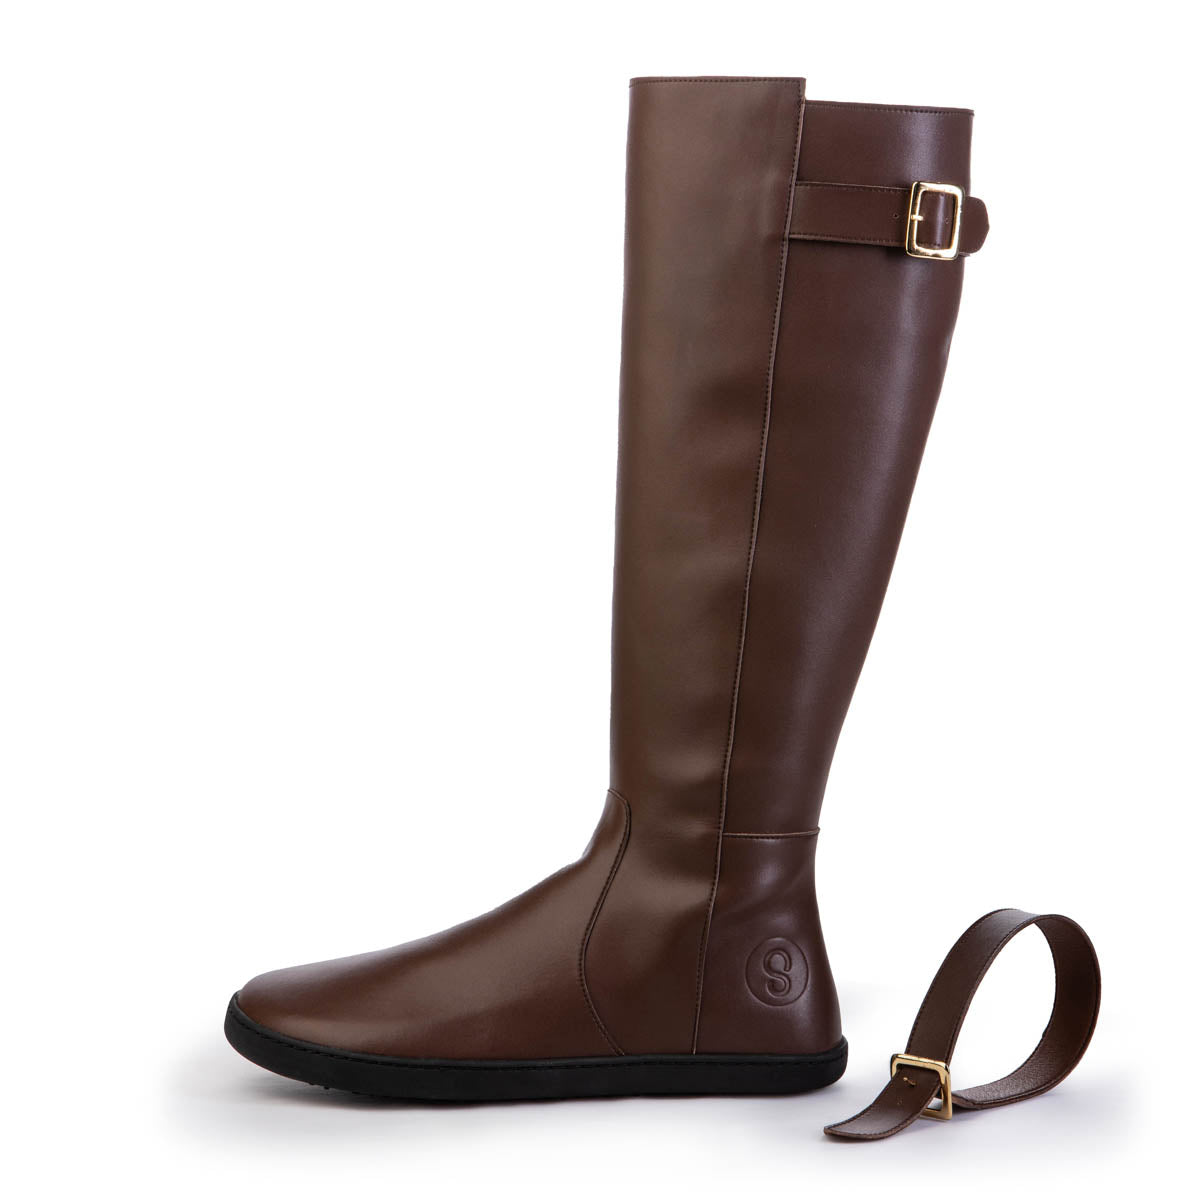 A photo of Shapen Glam lined riding boots made with vegan leather a faux fur lining and rubber soles. The boots are brown in color with gold buckles on the top and around the ankle, the ankle buckle strap is removable. One boot is shown from the left side with the ankle buckle strap removed against a white background. color_brown